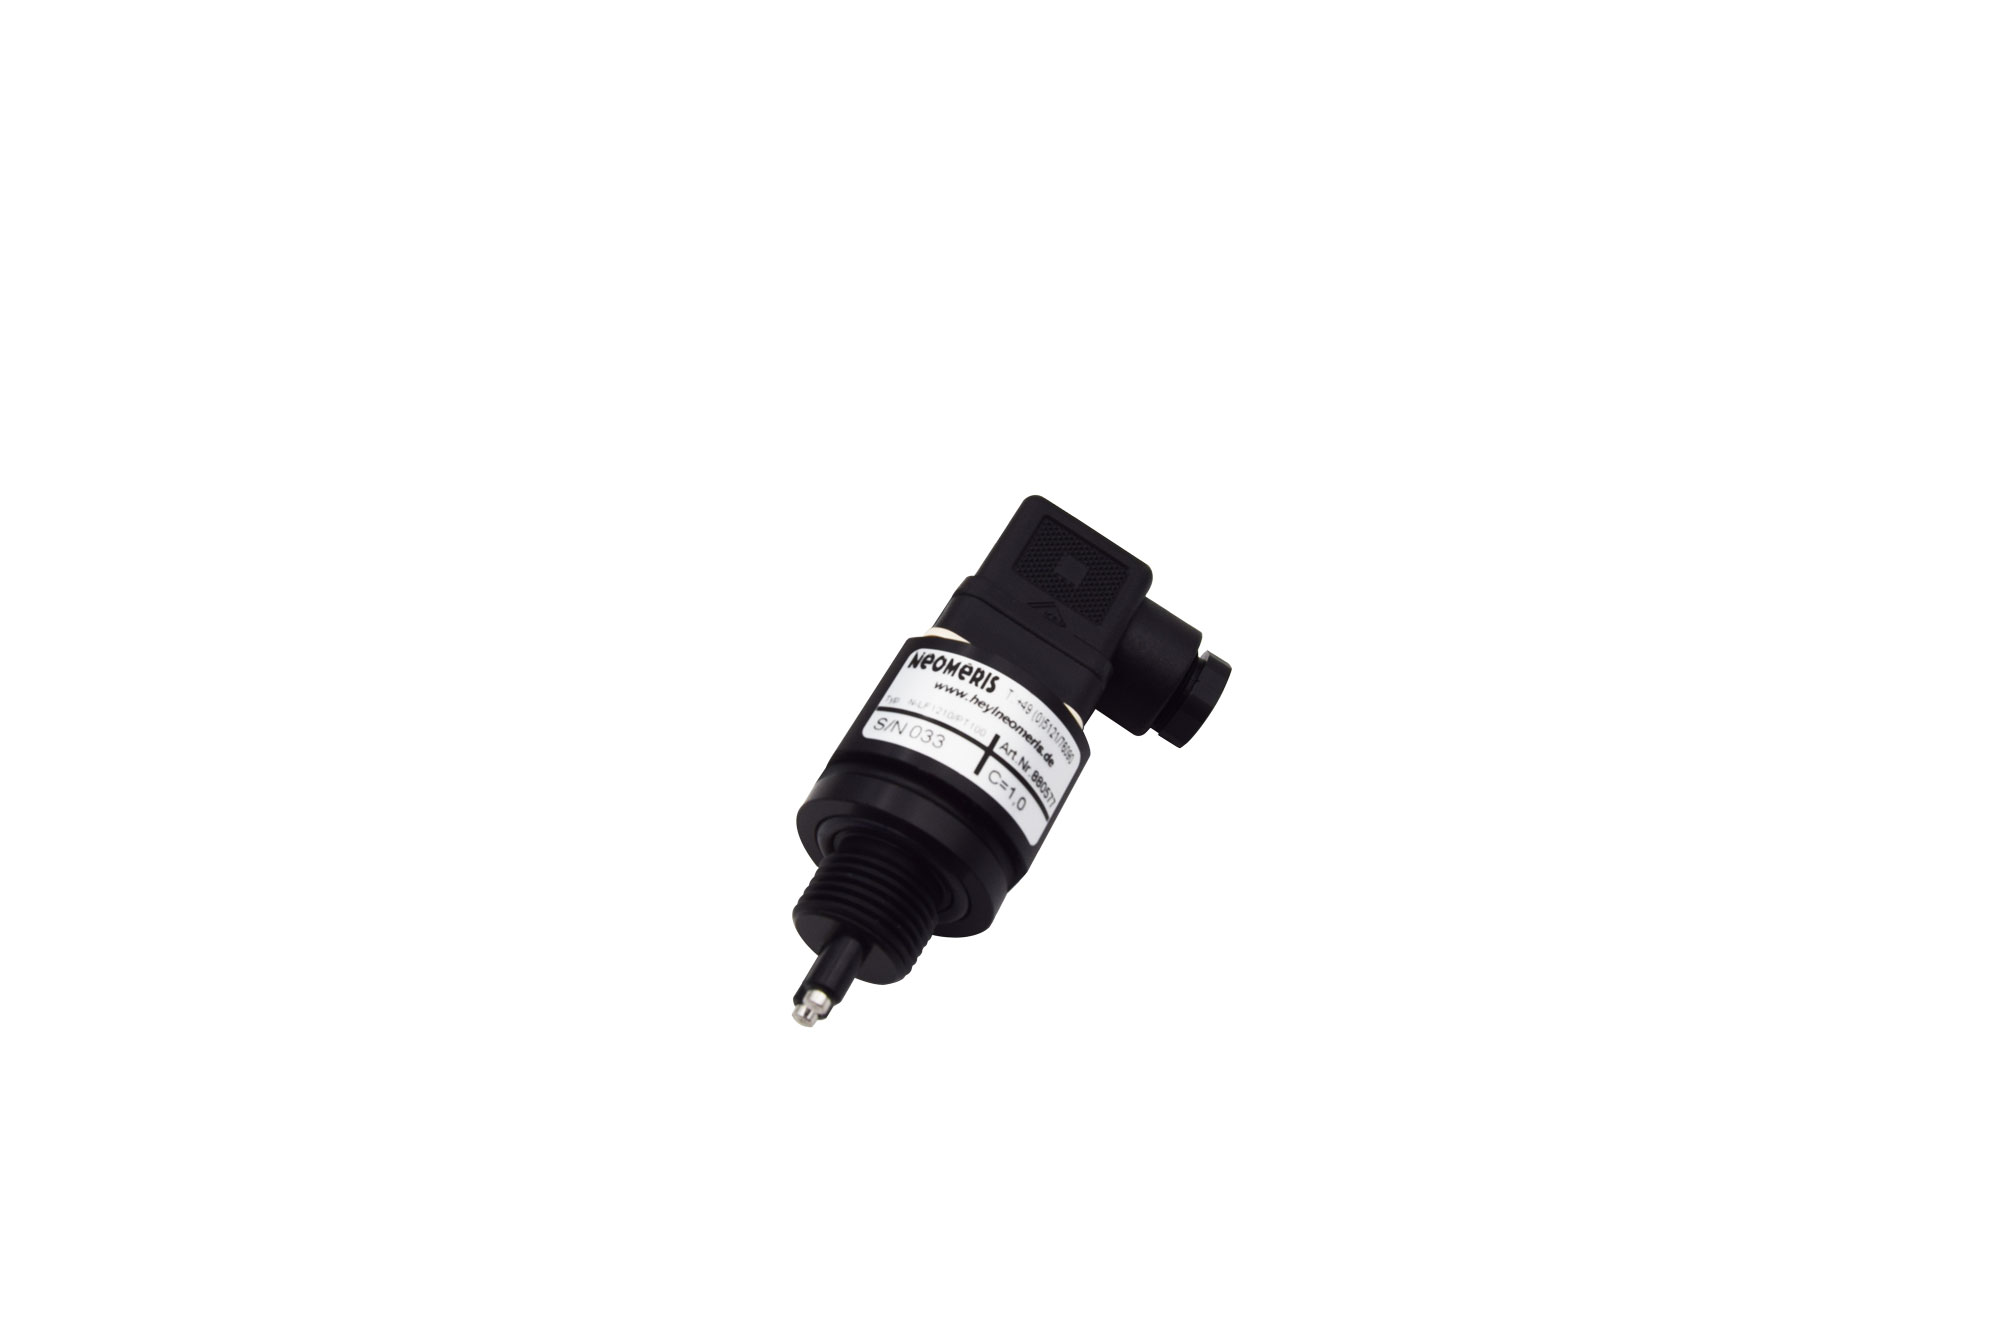 N-LF1210 conductivity measuring cell C=1.0 with PT100, 1/2 inch screw-in cell and solenoid valve connector